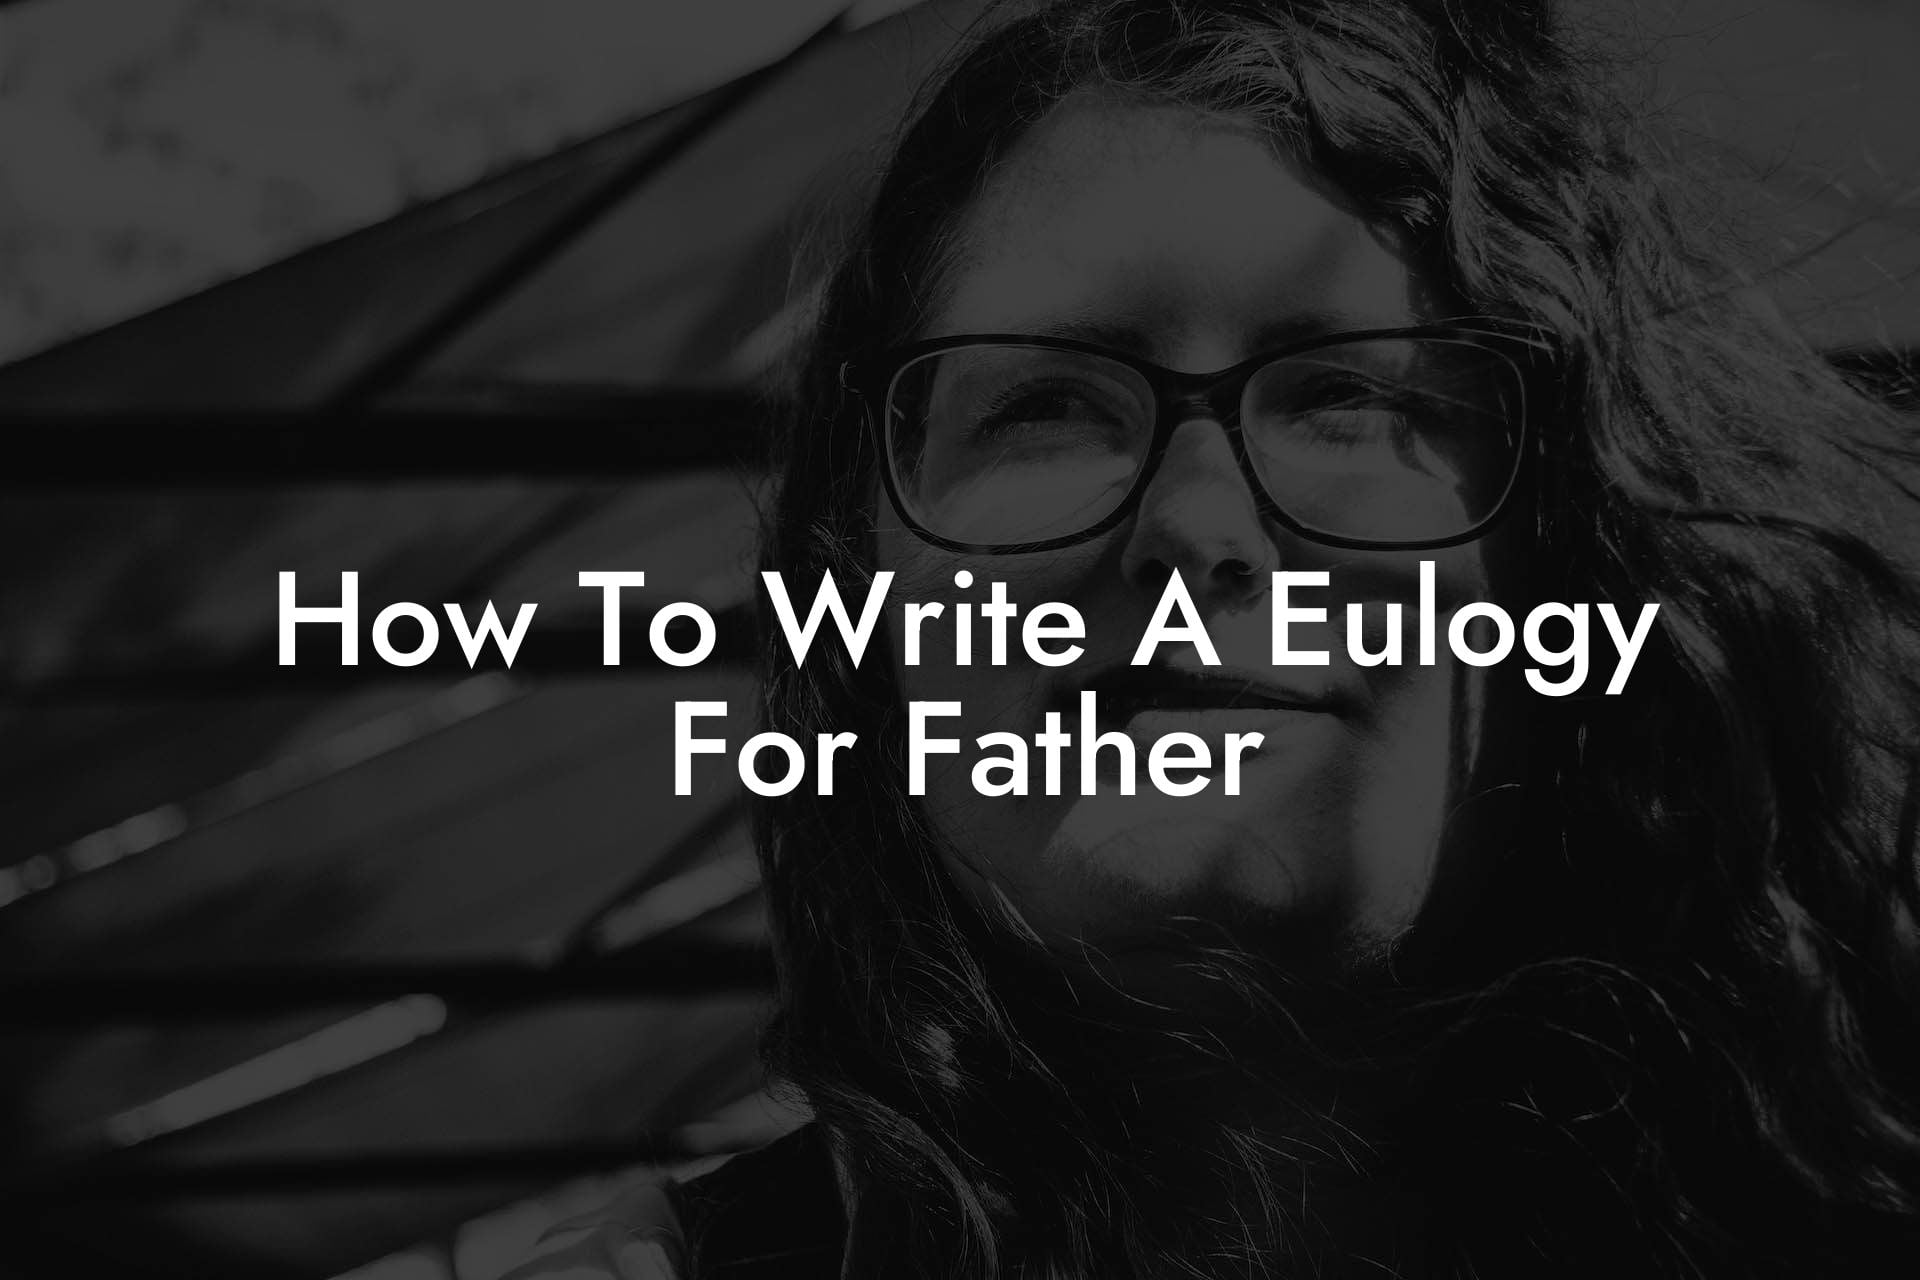 How To Write A Eulogy For Father